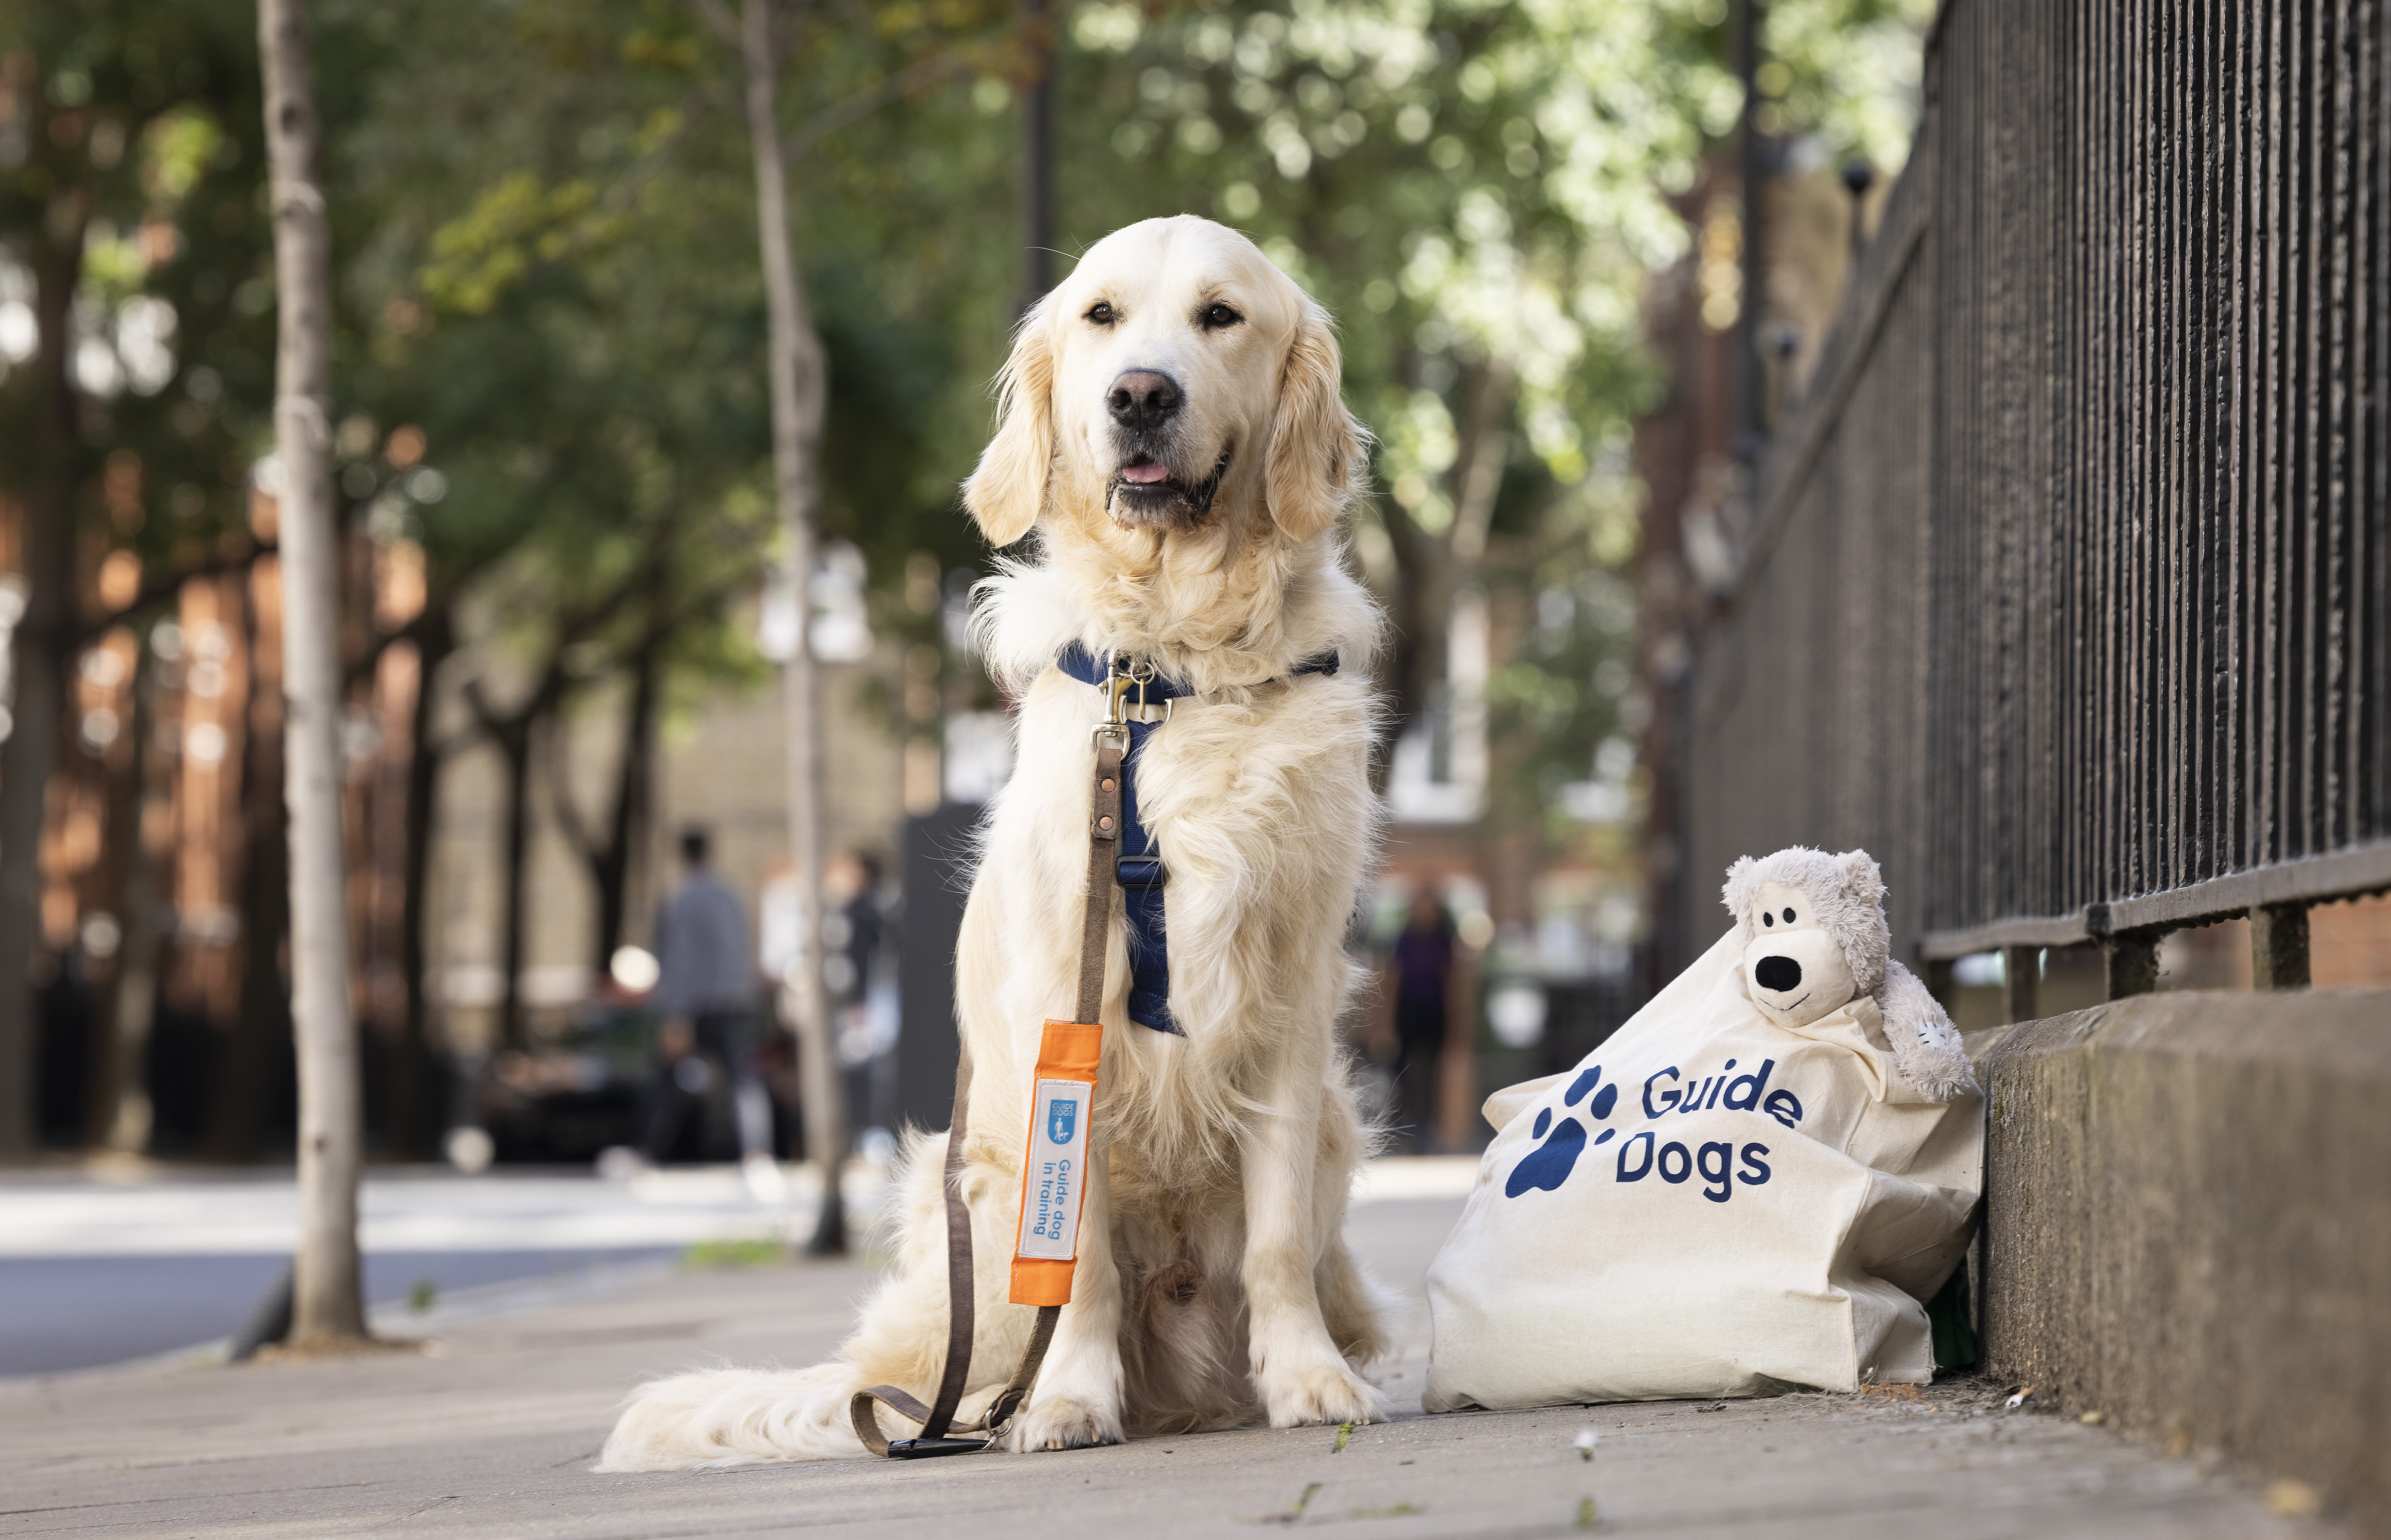 Golden retriever Ron sit on the pavement next to a Guide Dogs tote bag which has a grey teddy bear peeking out.